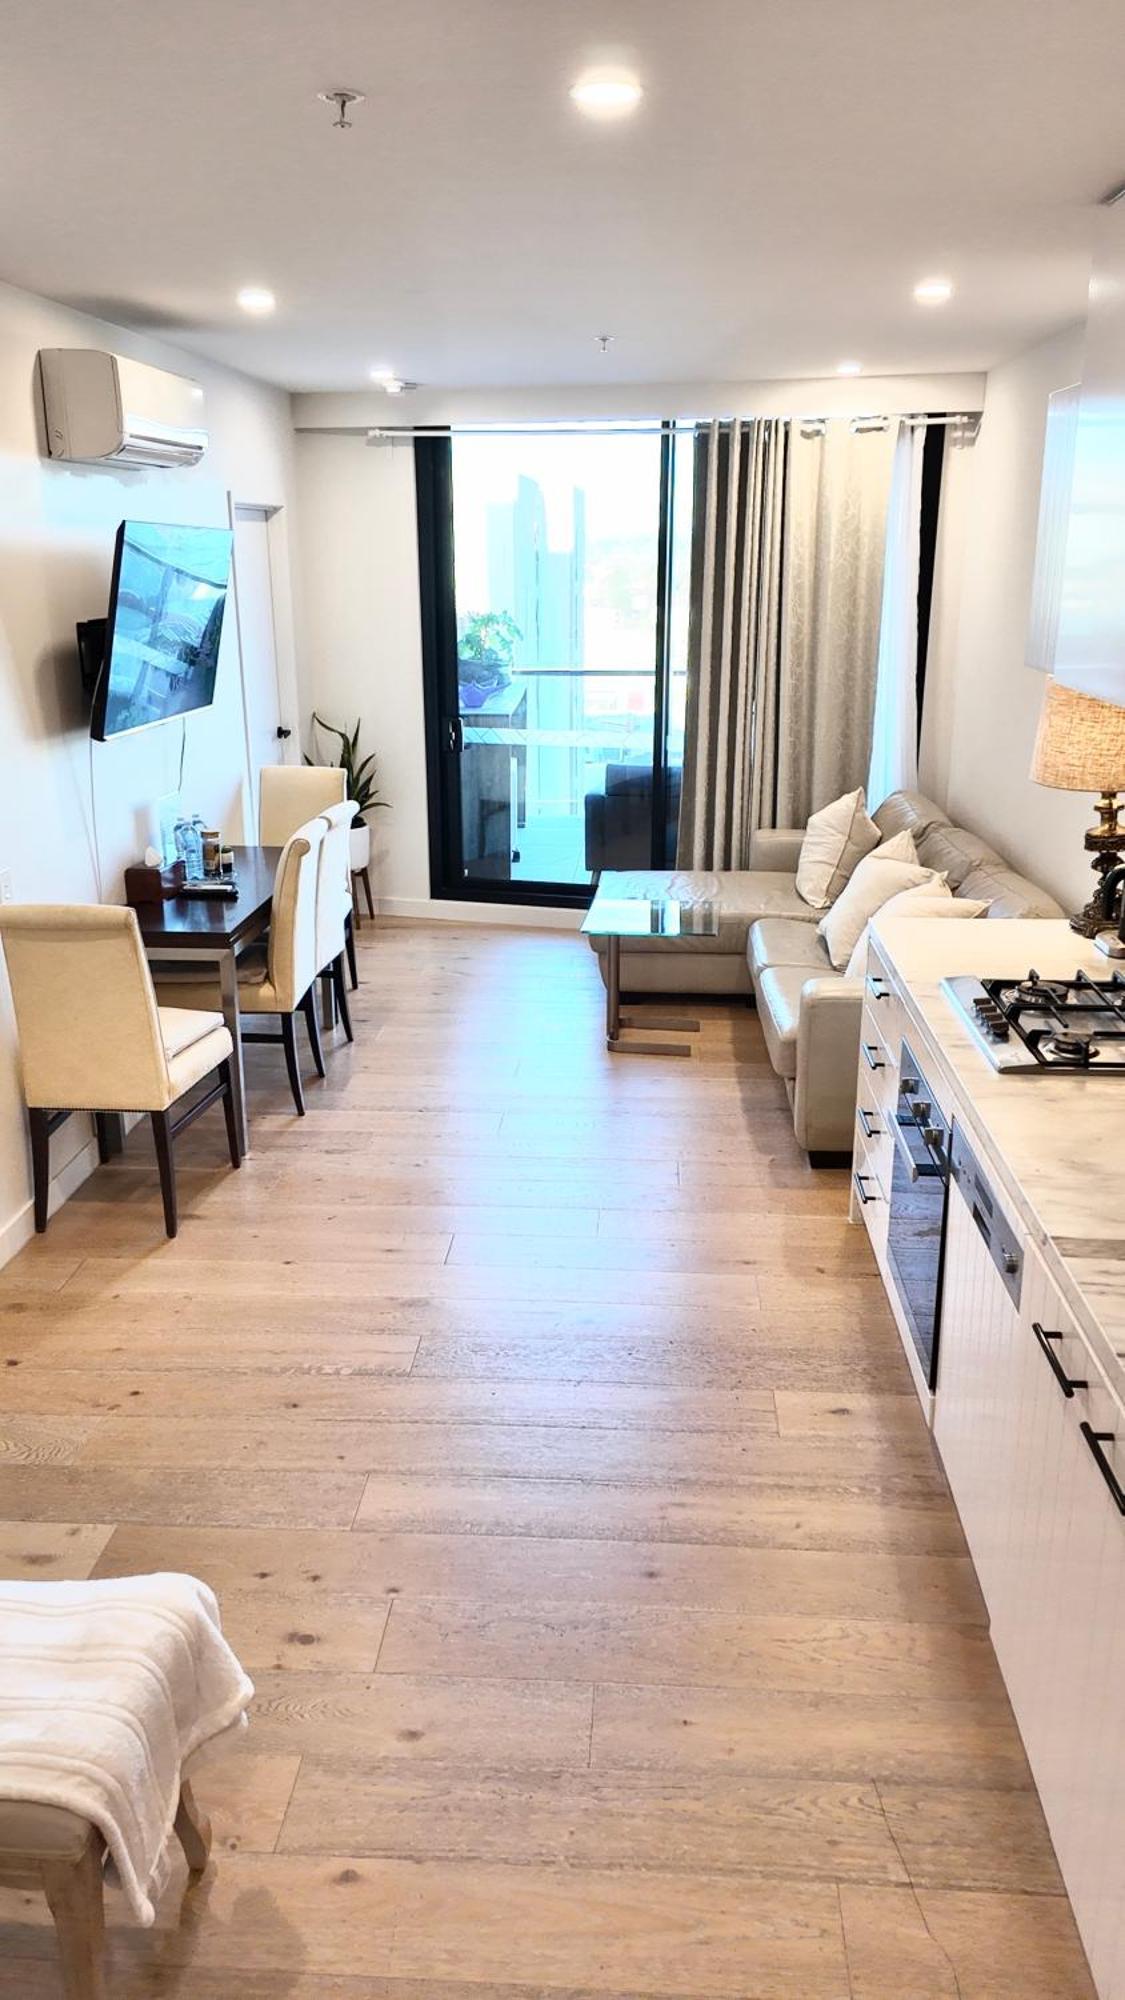 M-City Apartment - Executive Twin King Ensuites - Fully Equipped - Free Parking, Fast Wifi, Smart Tv, Netflix, Complementary Drinks & Amenities - M-City Shopping Centre Clayton 3168 المظهر الخارجي الصورة